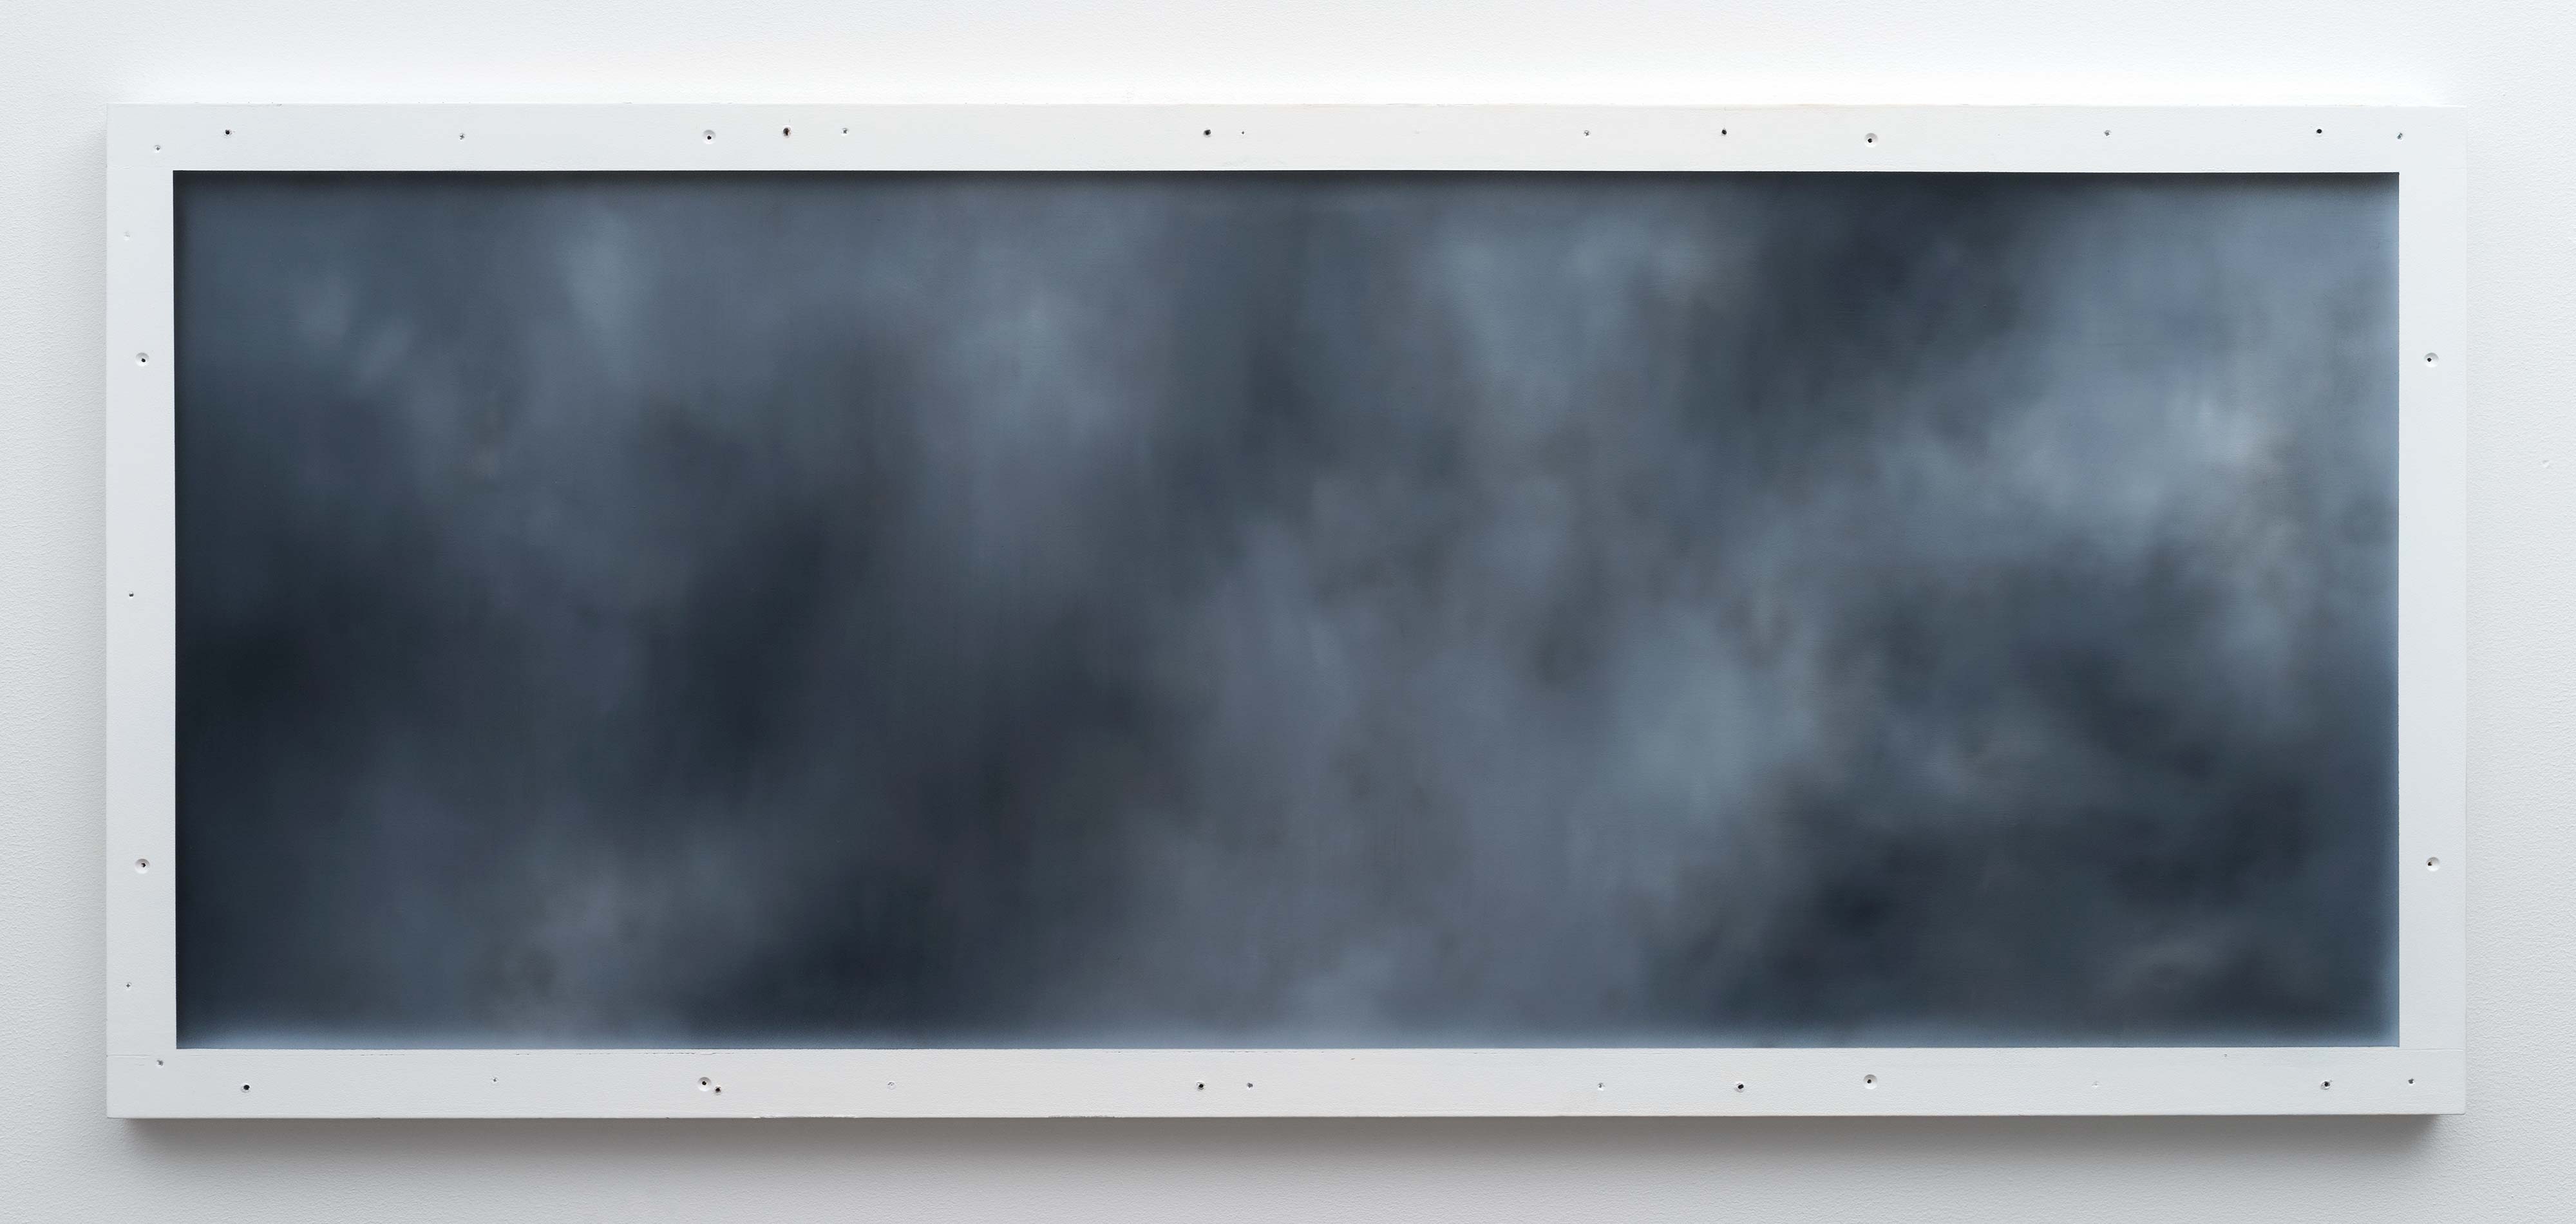 Christopher Page<br>Nocturne (V)<br>2016<br>oil and acrylic on panel<br>23.6 x 54.3 in (60 x 138 cm)